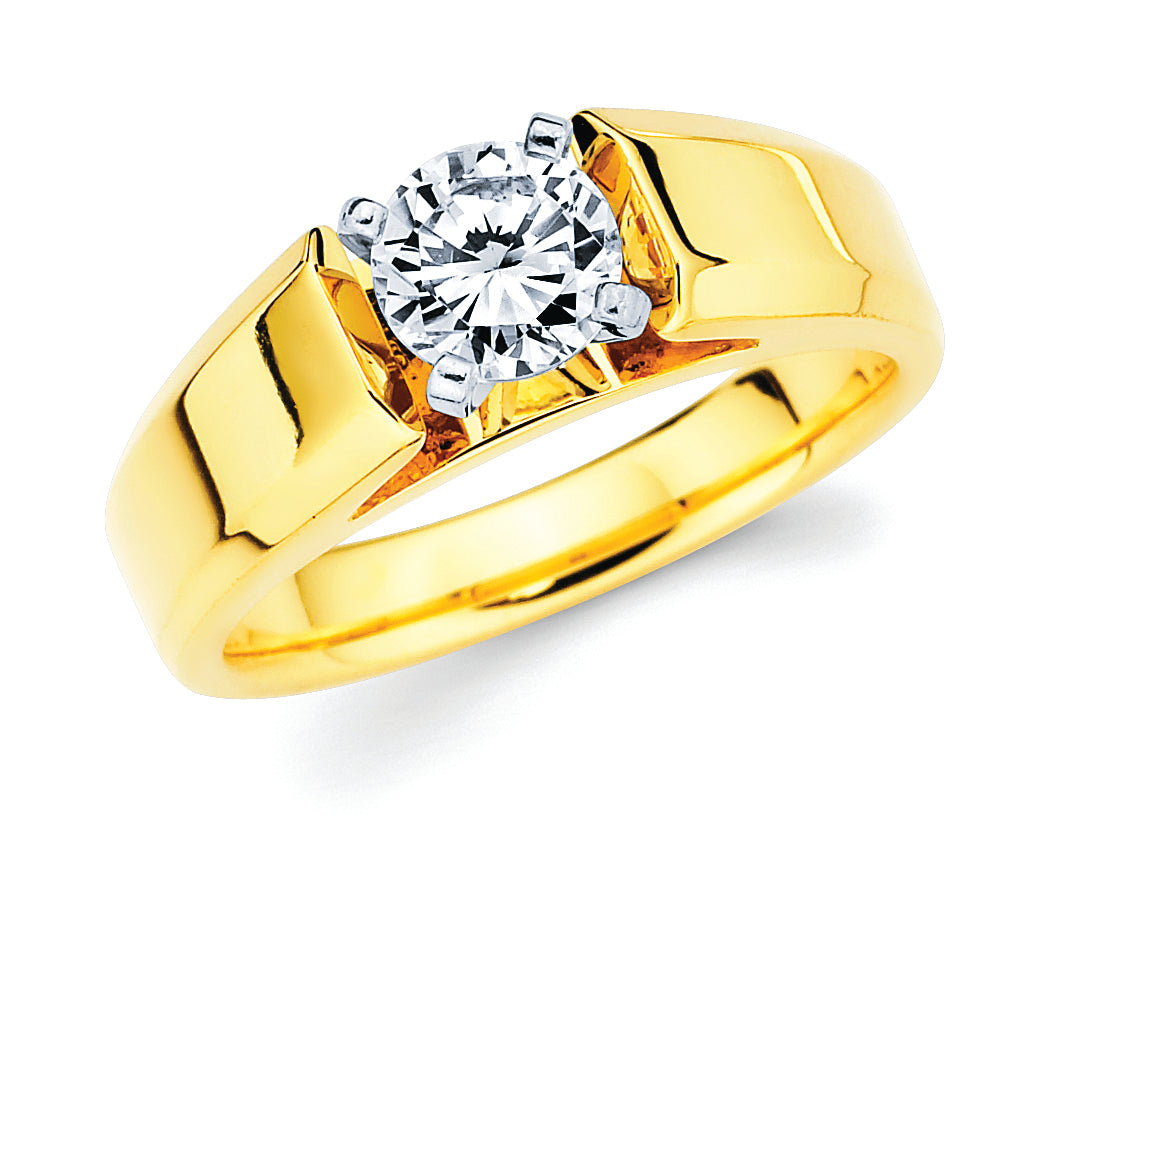 Classic Bridal: Diamond Ring shown with 3/4 Ct. Round Center Stone in 14K Gold